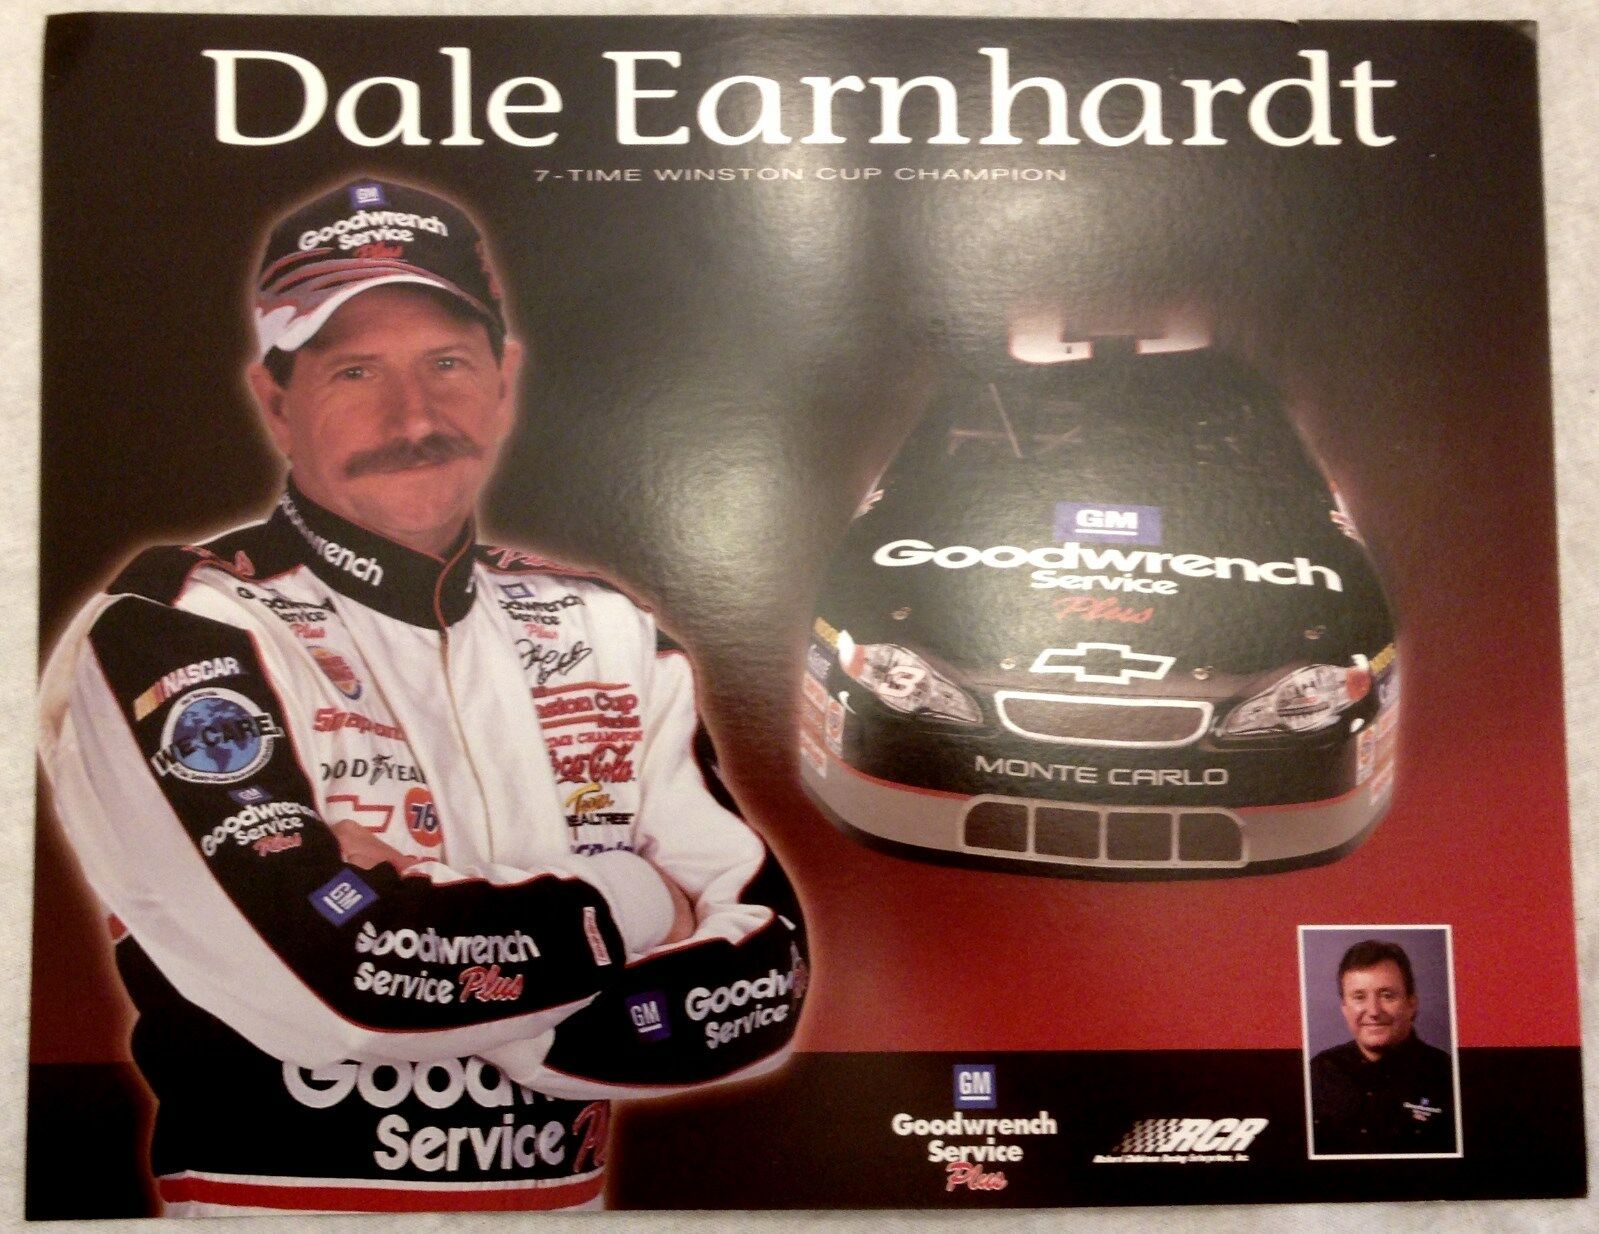 Primary image for Dale Earnhardt Post Card, 8x10, Intimidator 2000